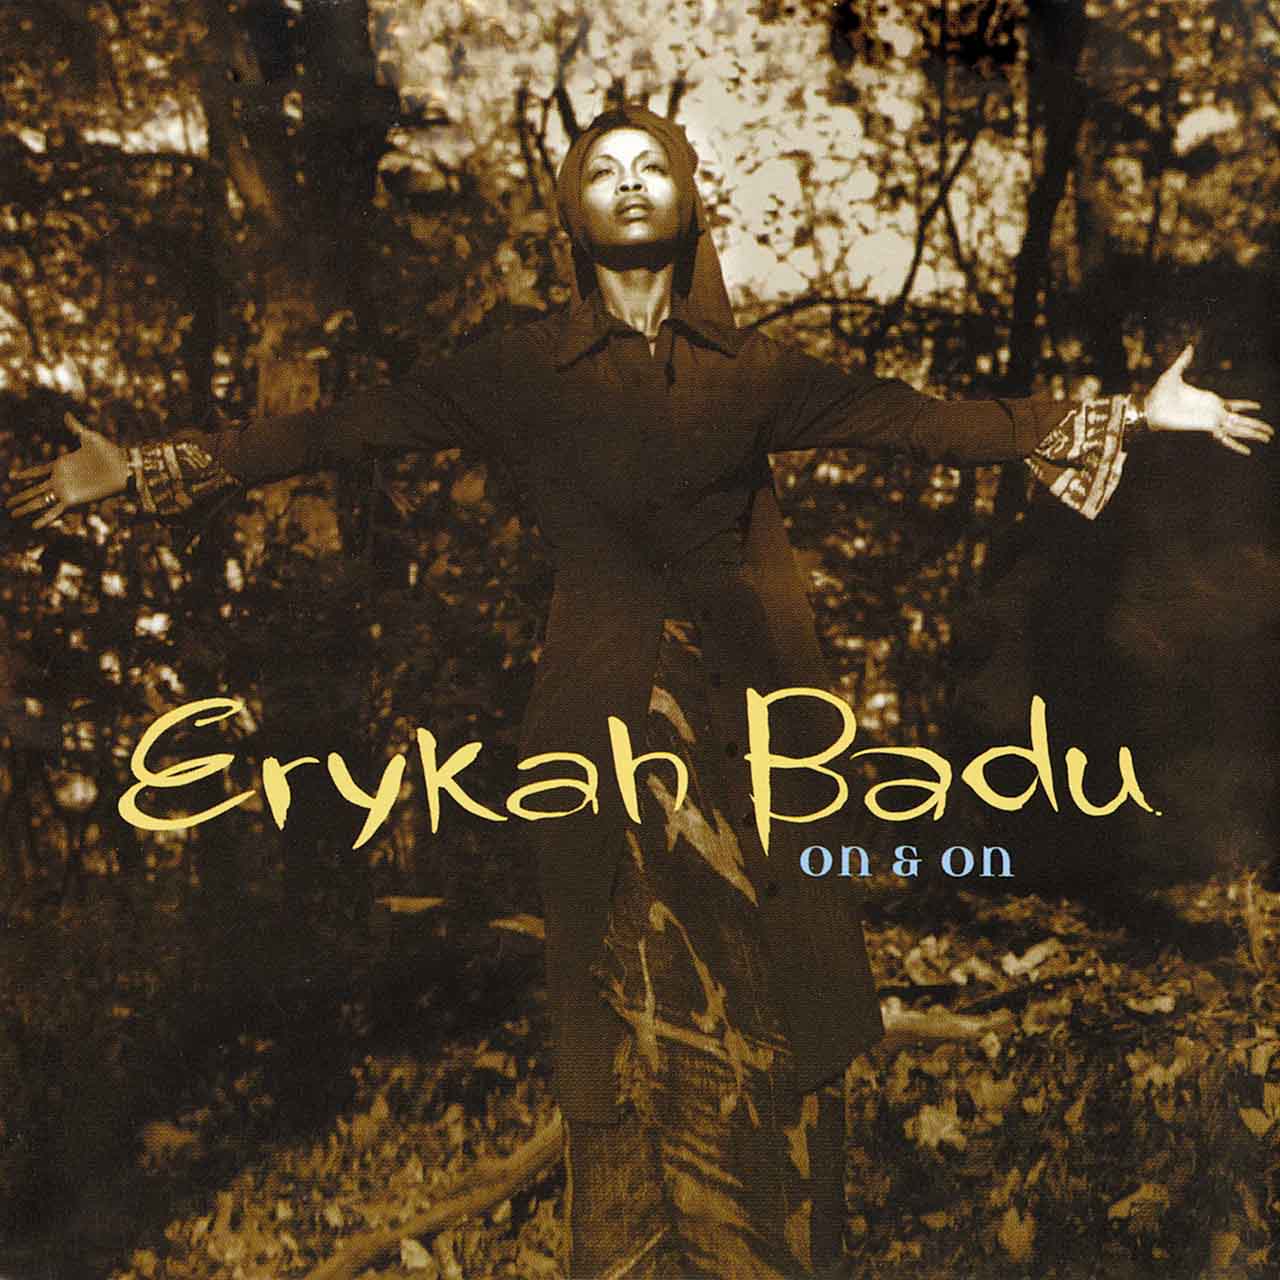 ‘On & On’: Erykah Badu’s Debut Launched A Movement